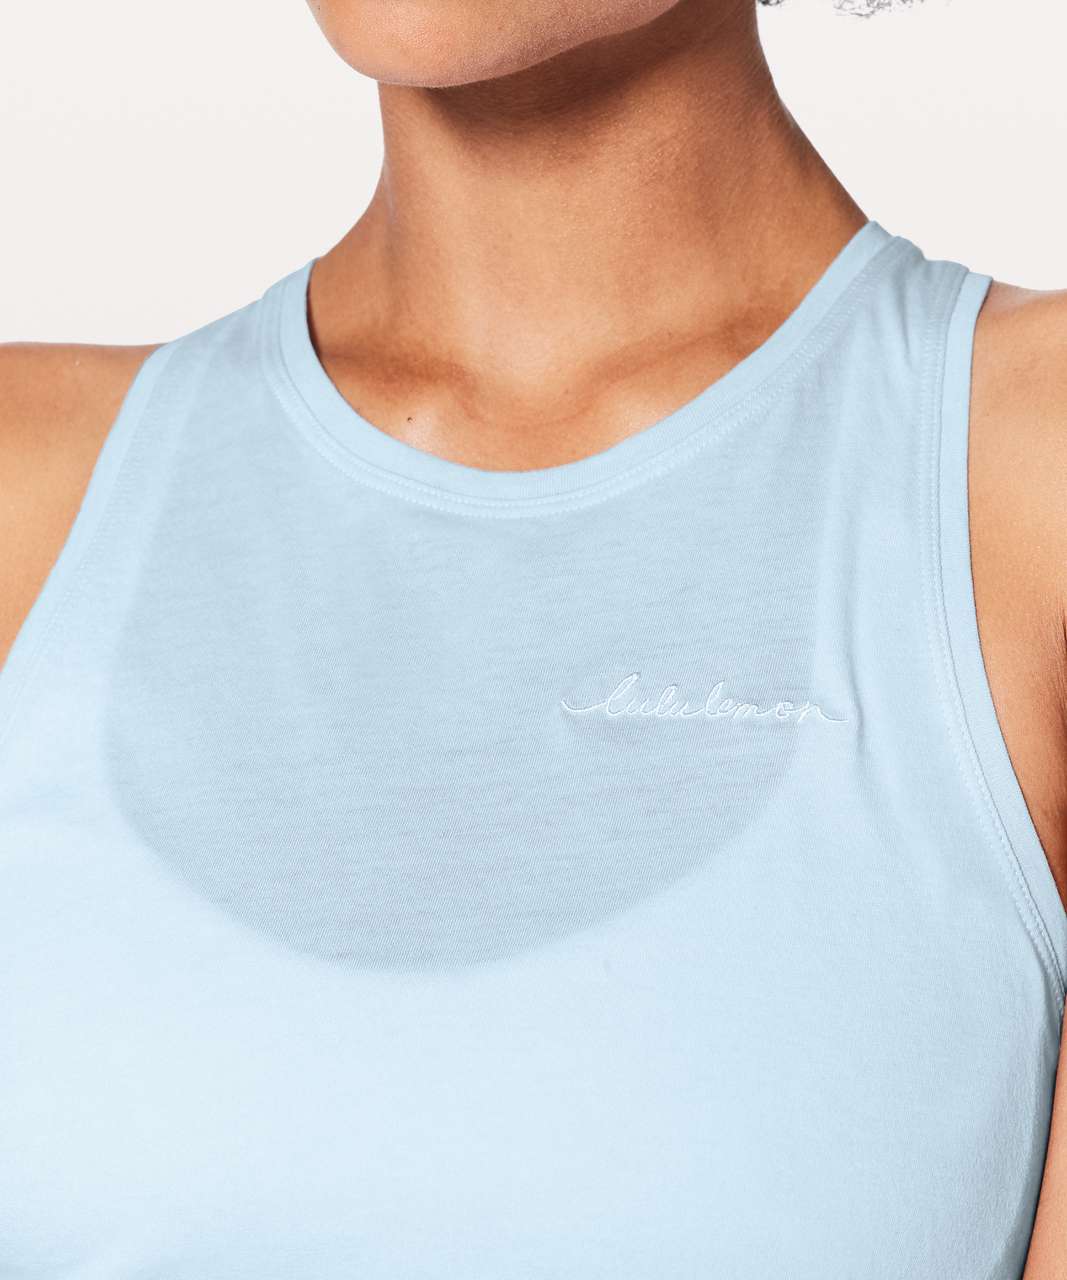 Lululemon All Tied Up Tank *Expression - Breezy